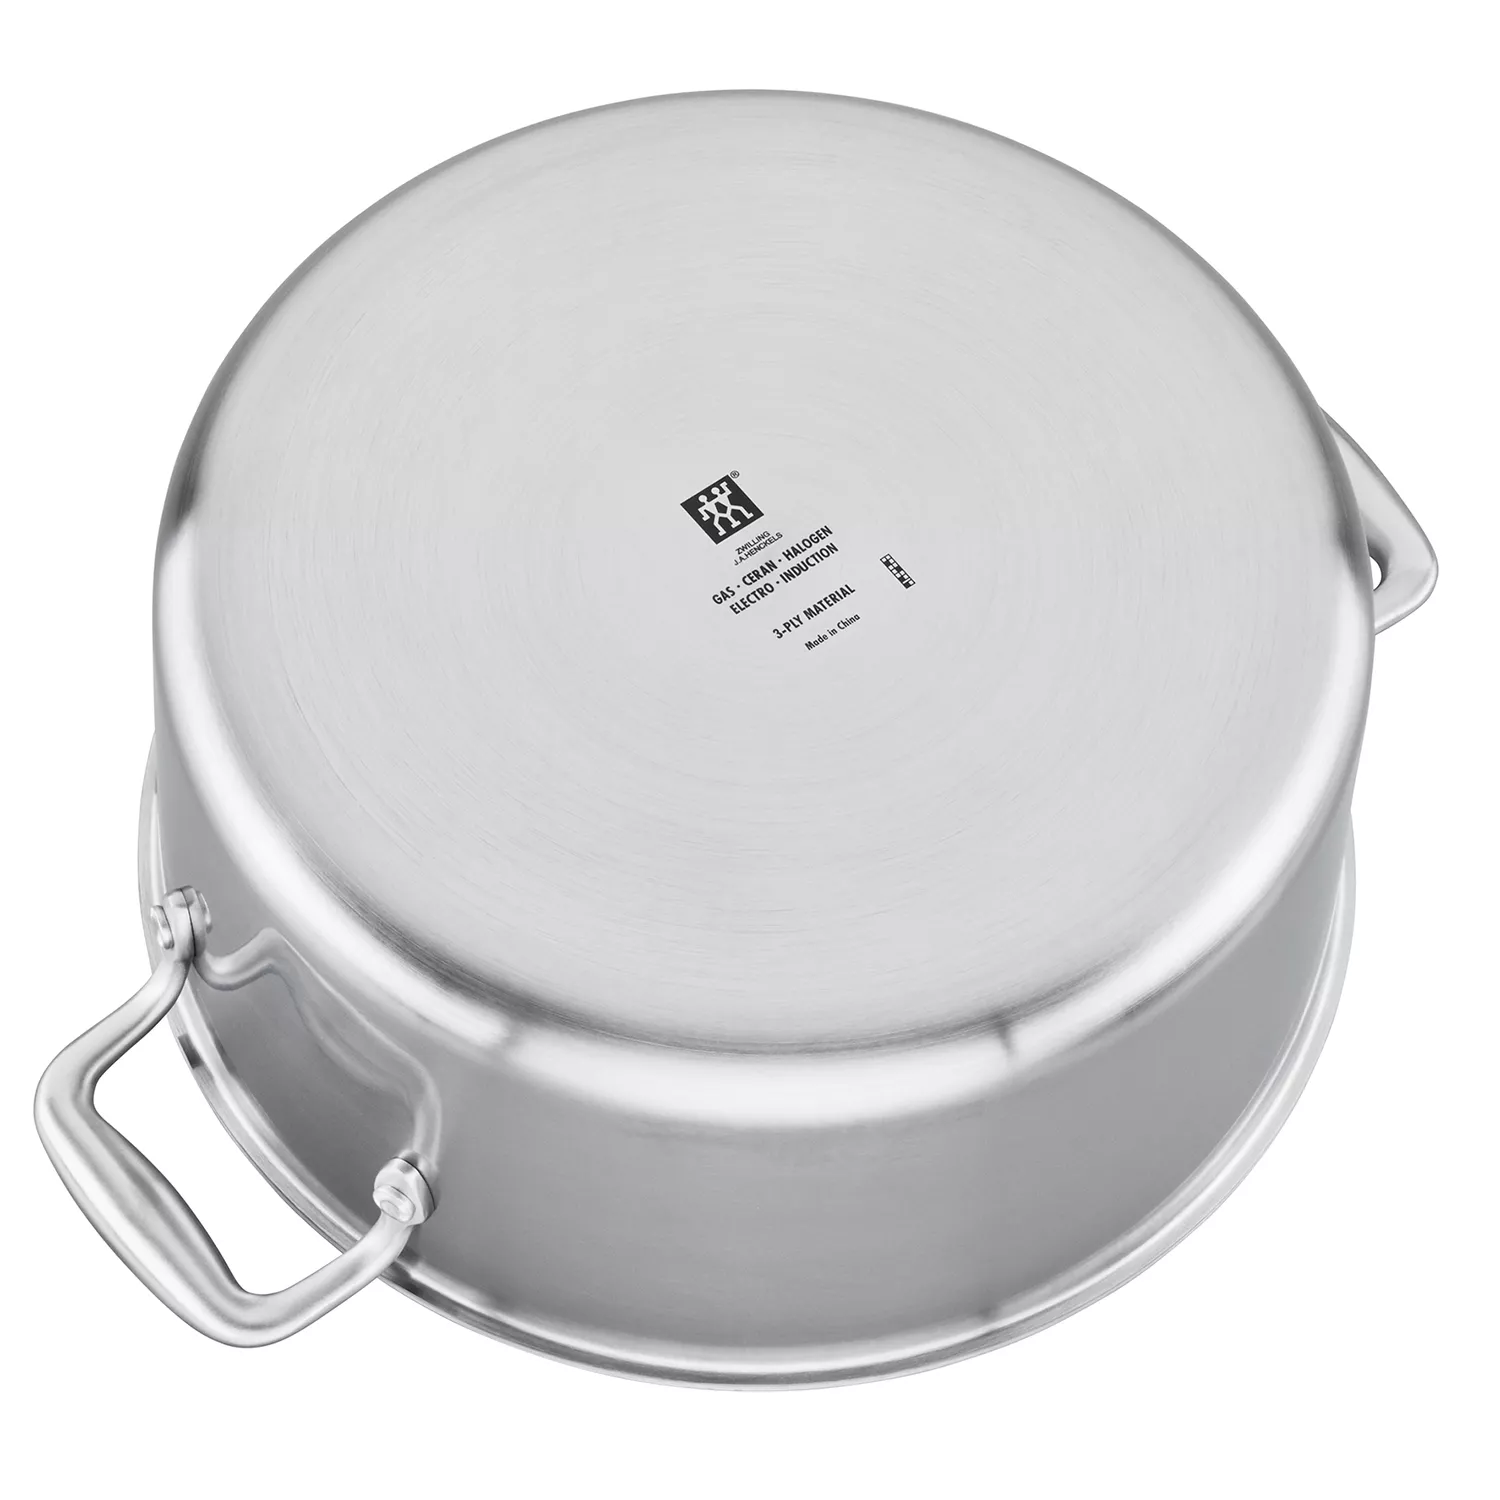 Score 40% off these Zwilling food containers and be more eco-friendly